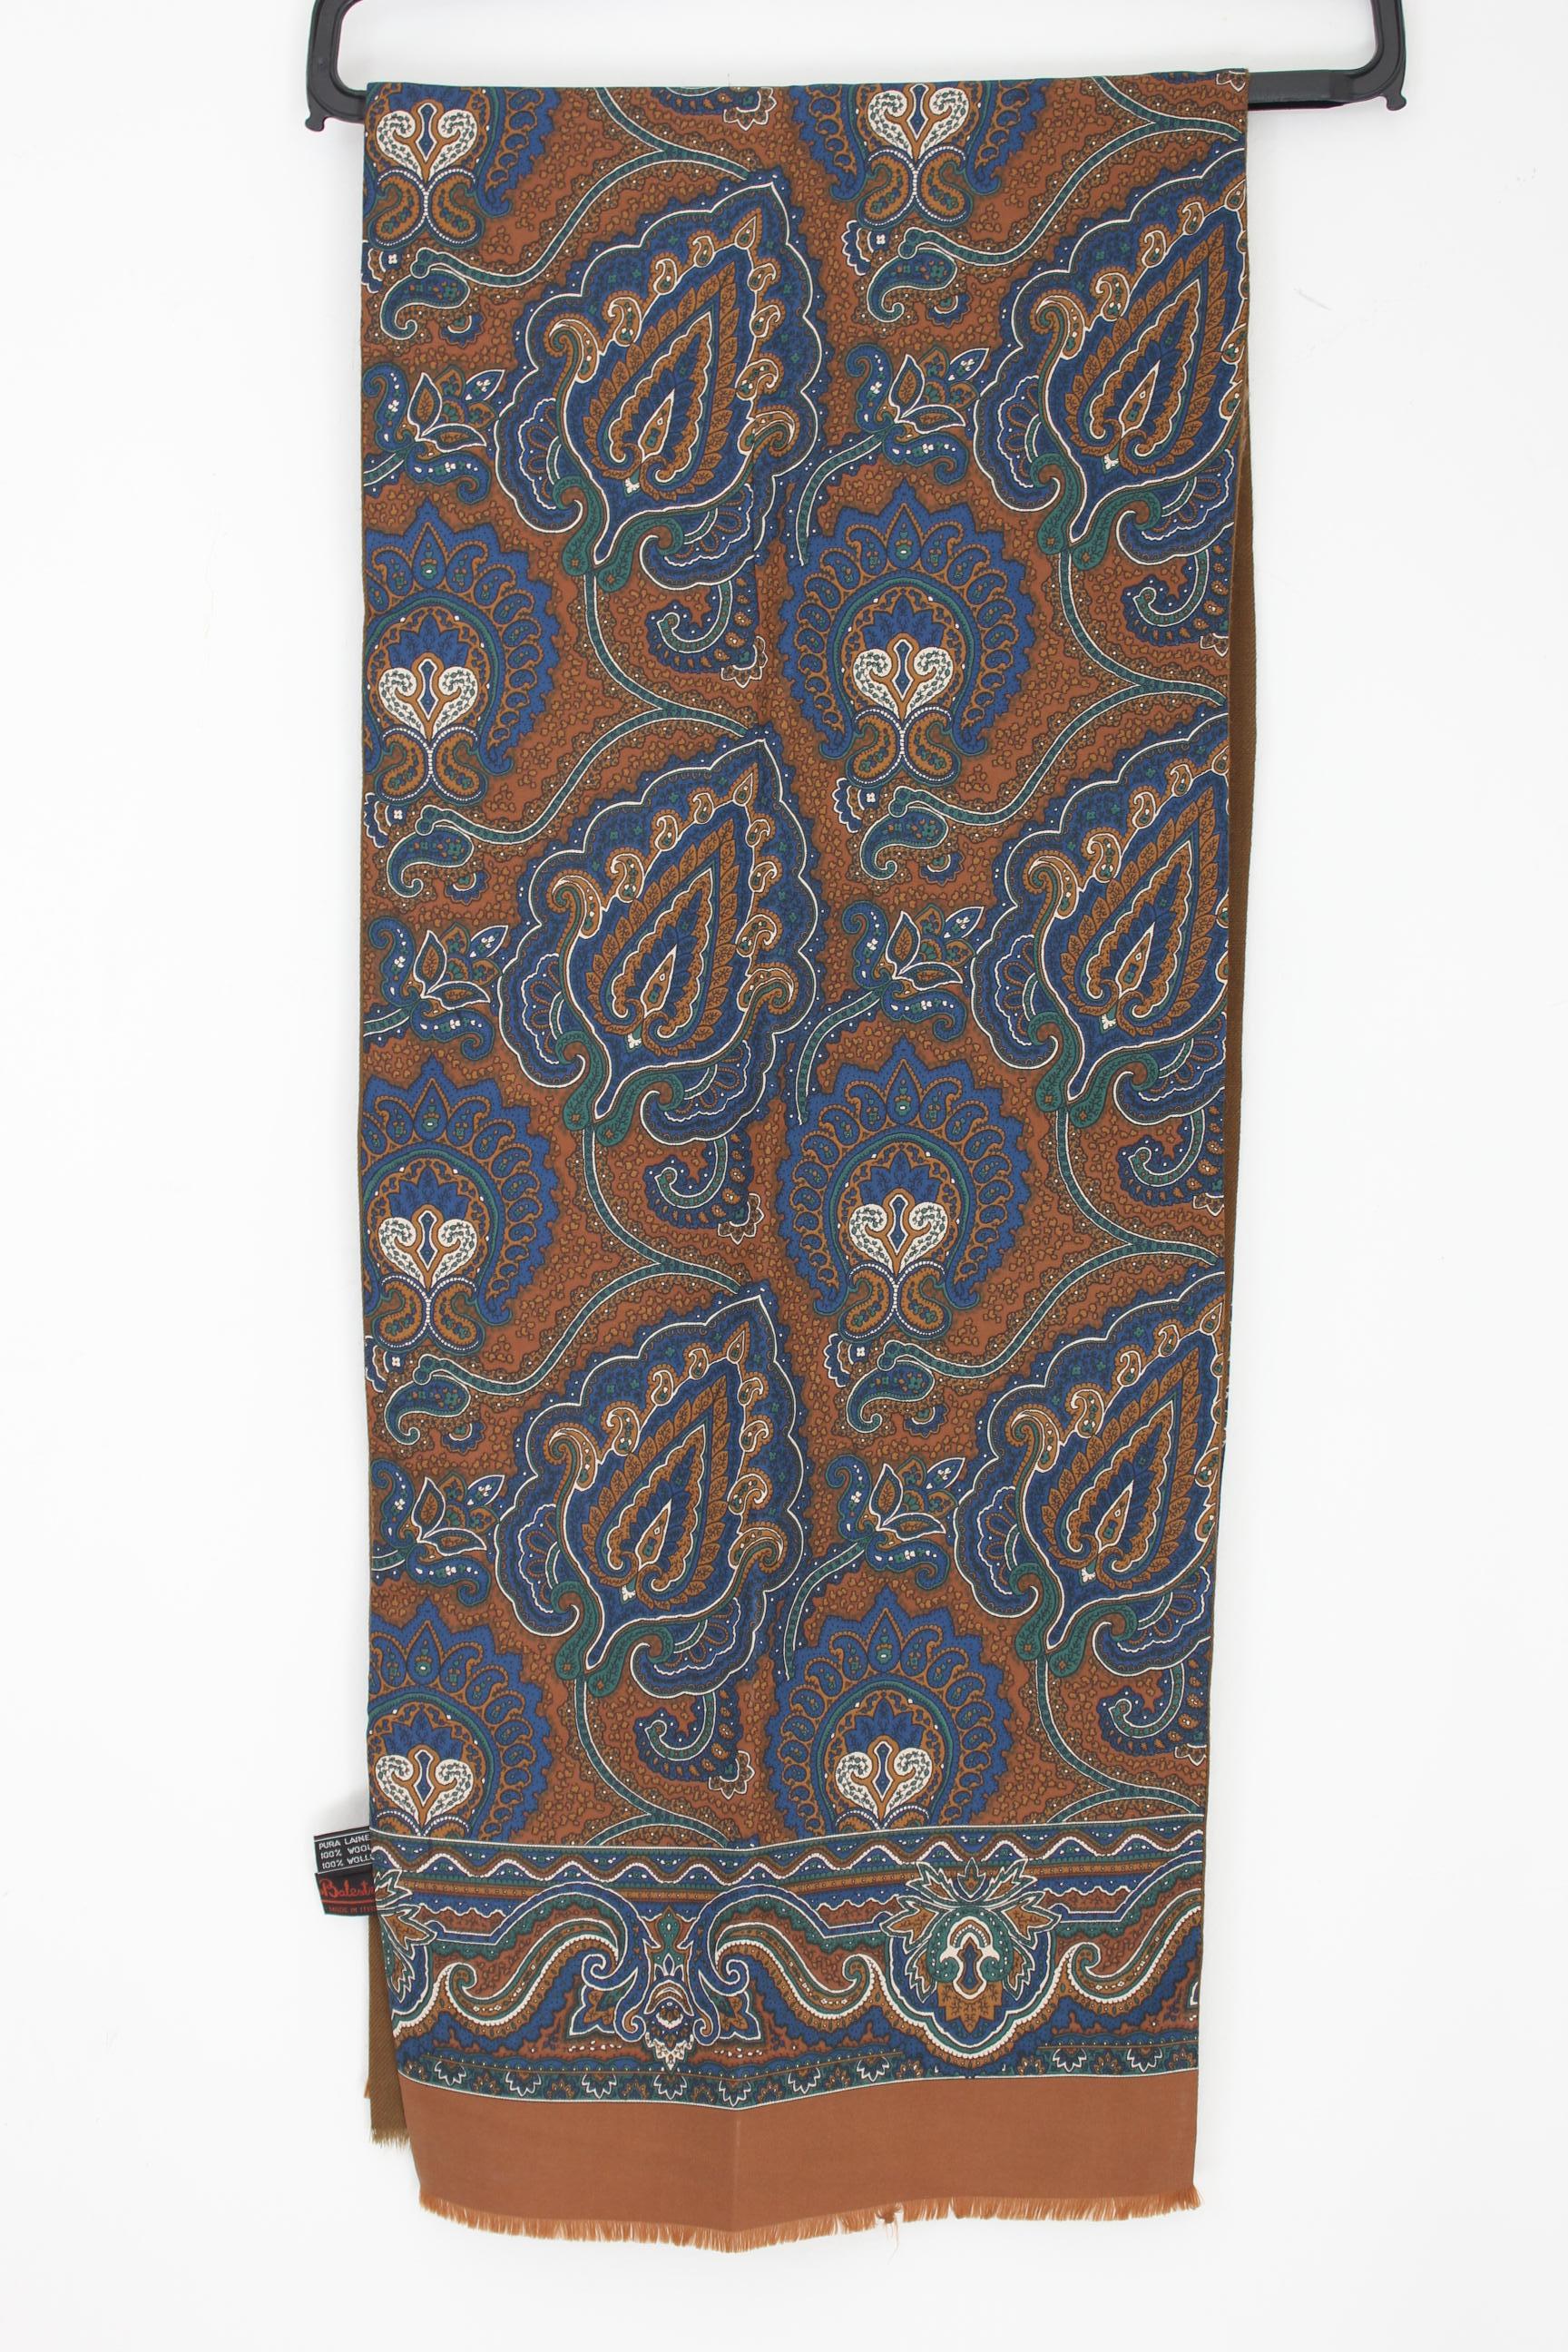 ntroducing the Renato Balestra tubular scarf, a stunning piece that will elevate any outfit. This vintage scarf, dating back to the 90s, features a gorgeous brown hue with a striking paisley pattern in shades of blue, green, and beige. The scarf is